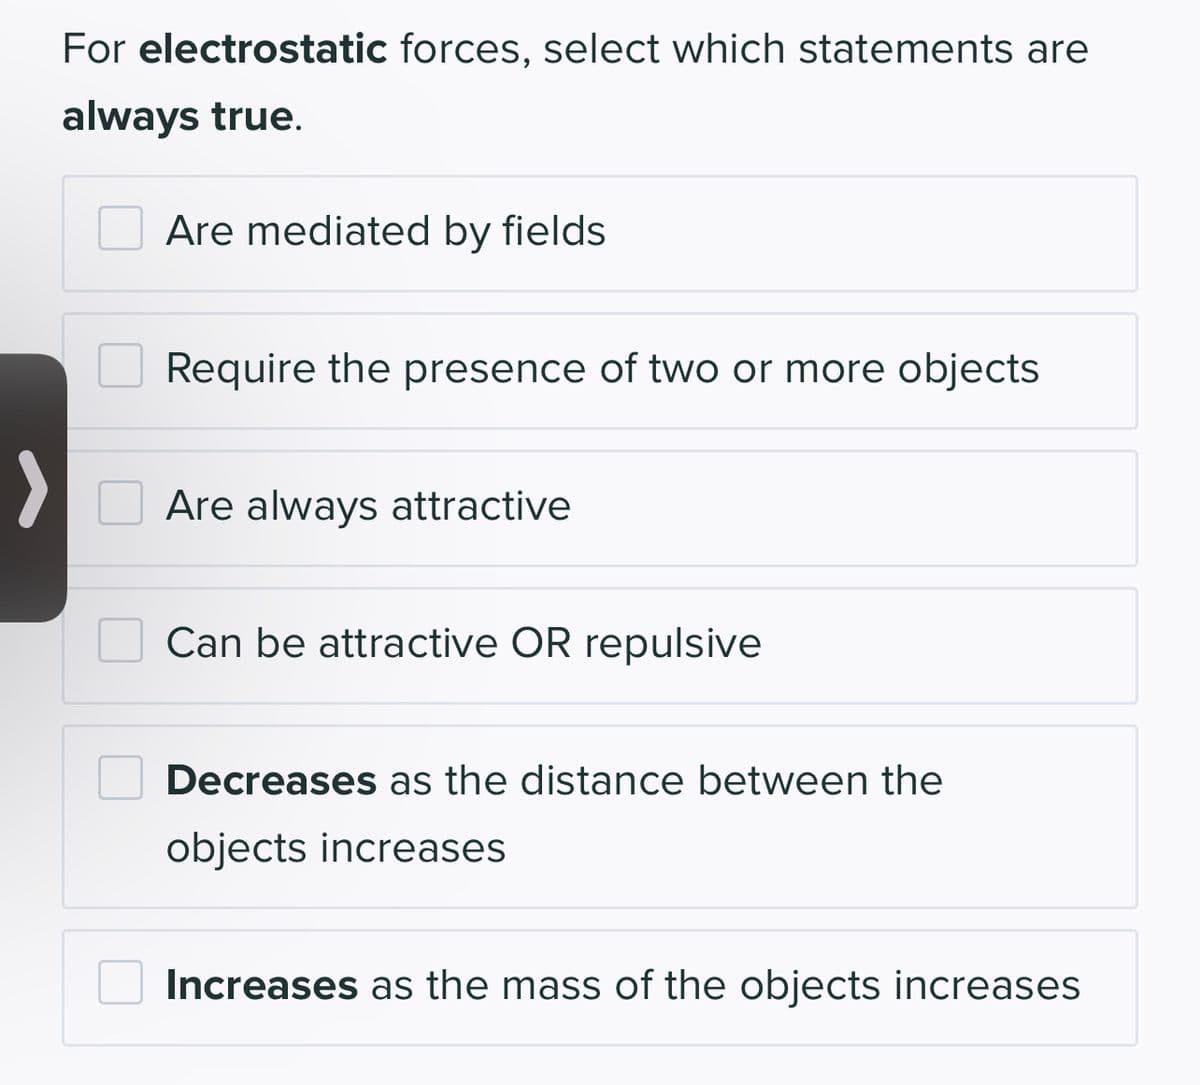 For electrostatic forces, select which statements are
always true.
Are mediated by fields
Require the presence of two or more objects
Are always attractive
Can be attractive OR repulsive
Decreases as the distance between the
objects increases
Increases as the mass of the objects increases